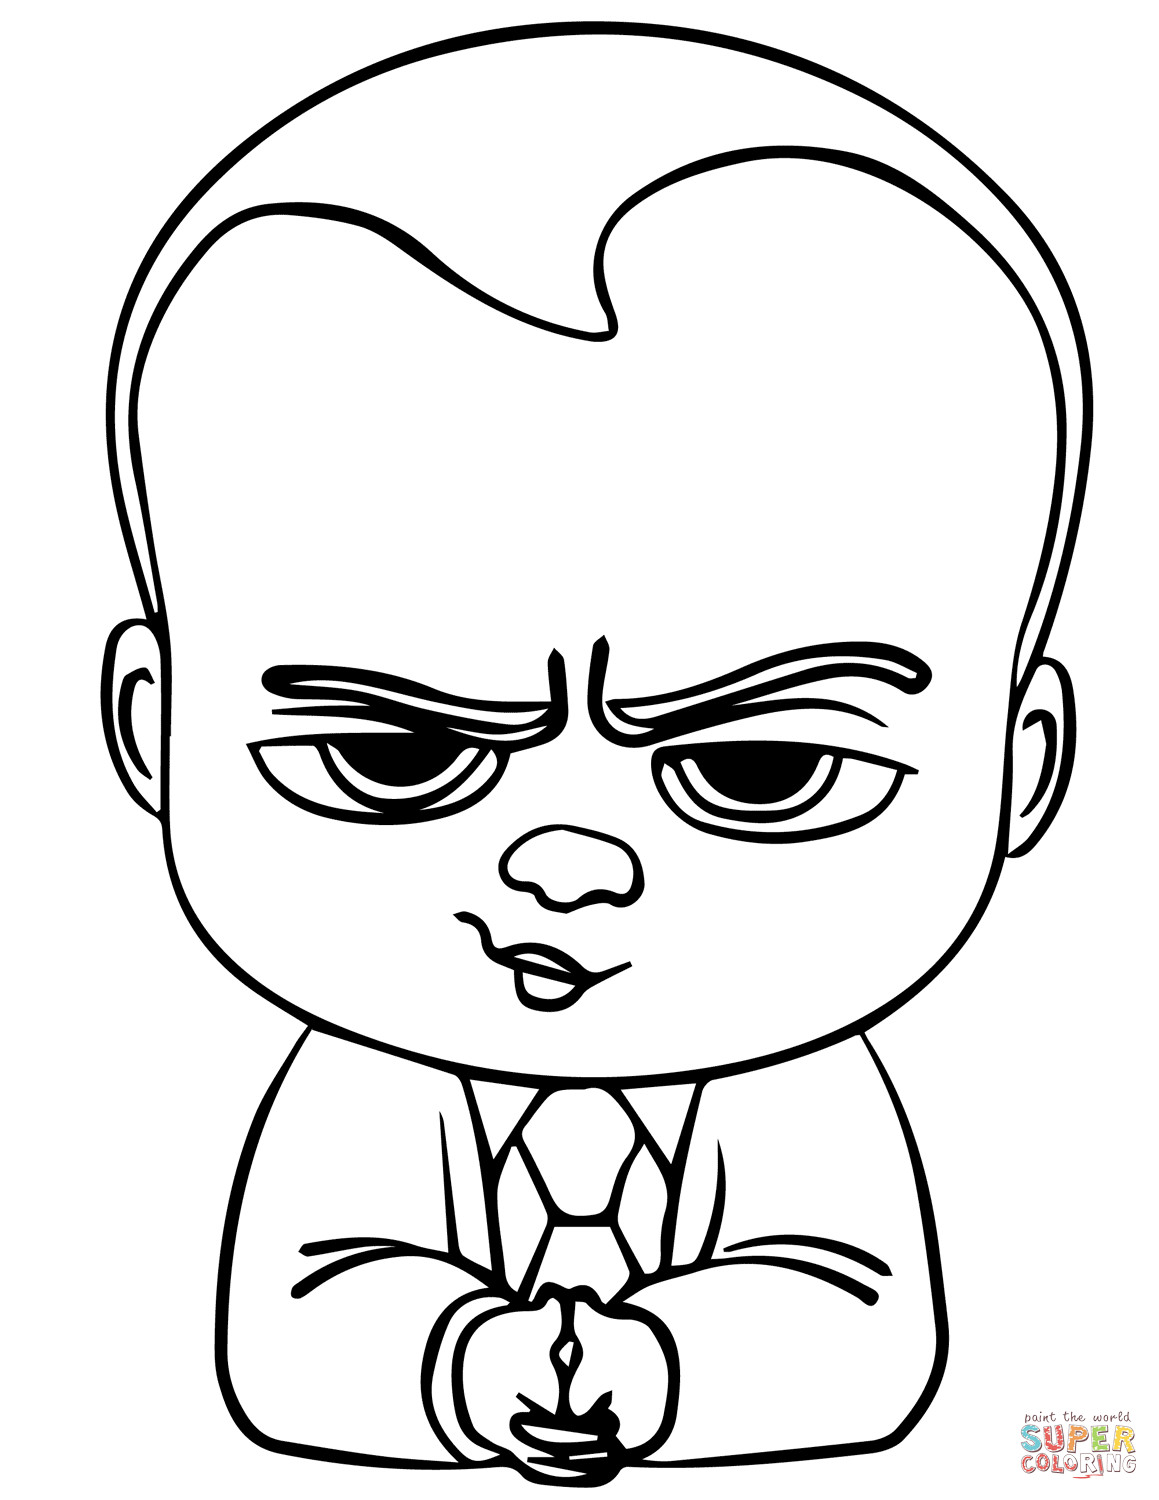 Baby Boss Coloring Pages
 The Boss Baby coloring page